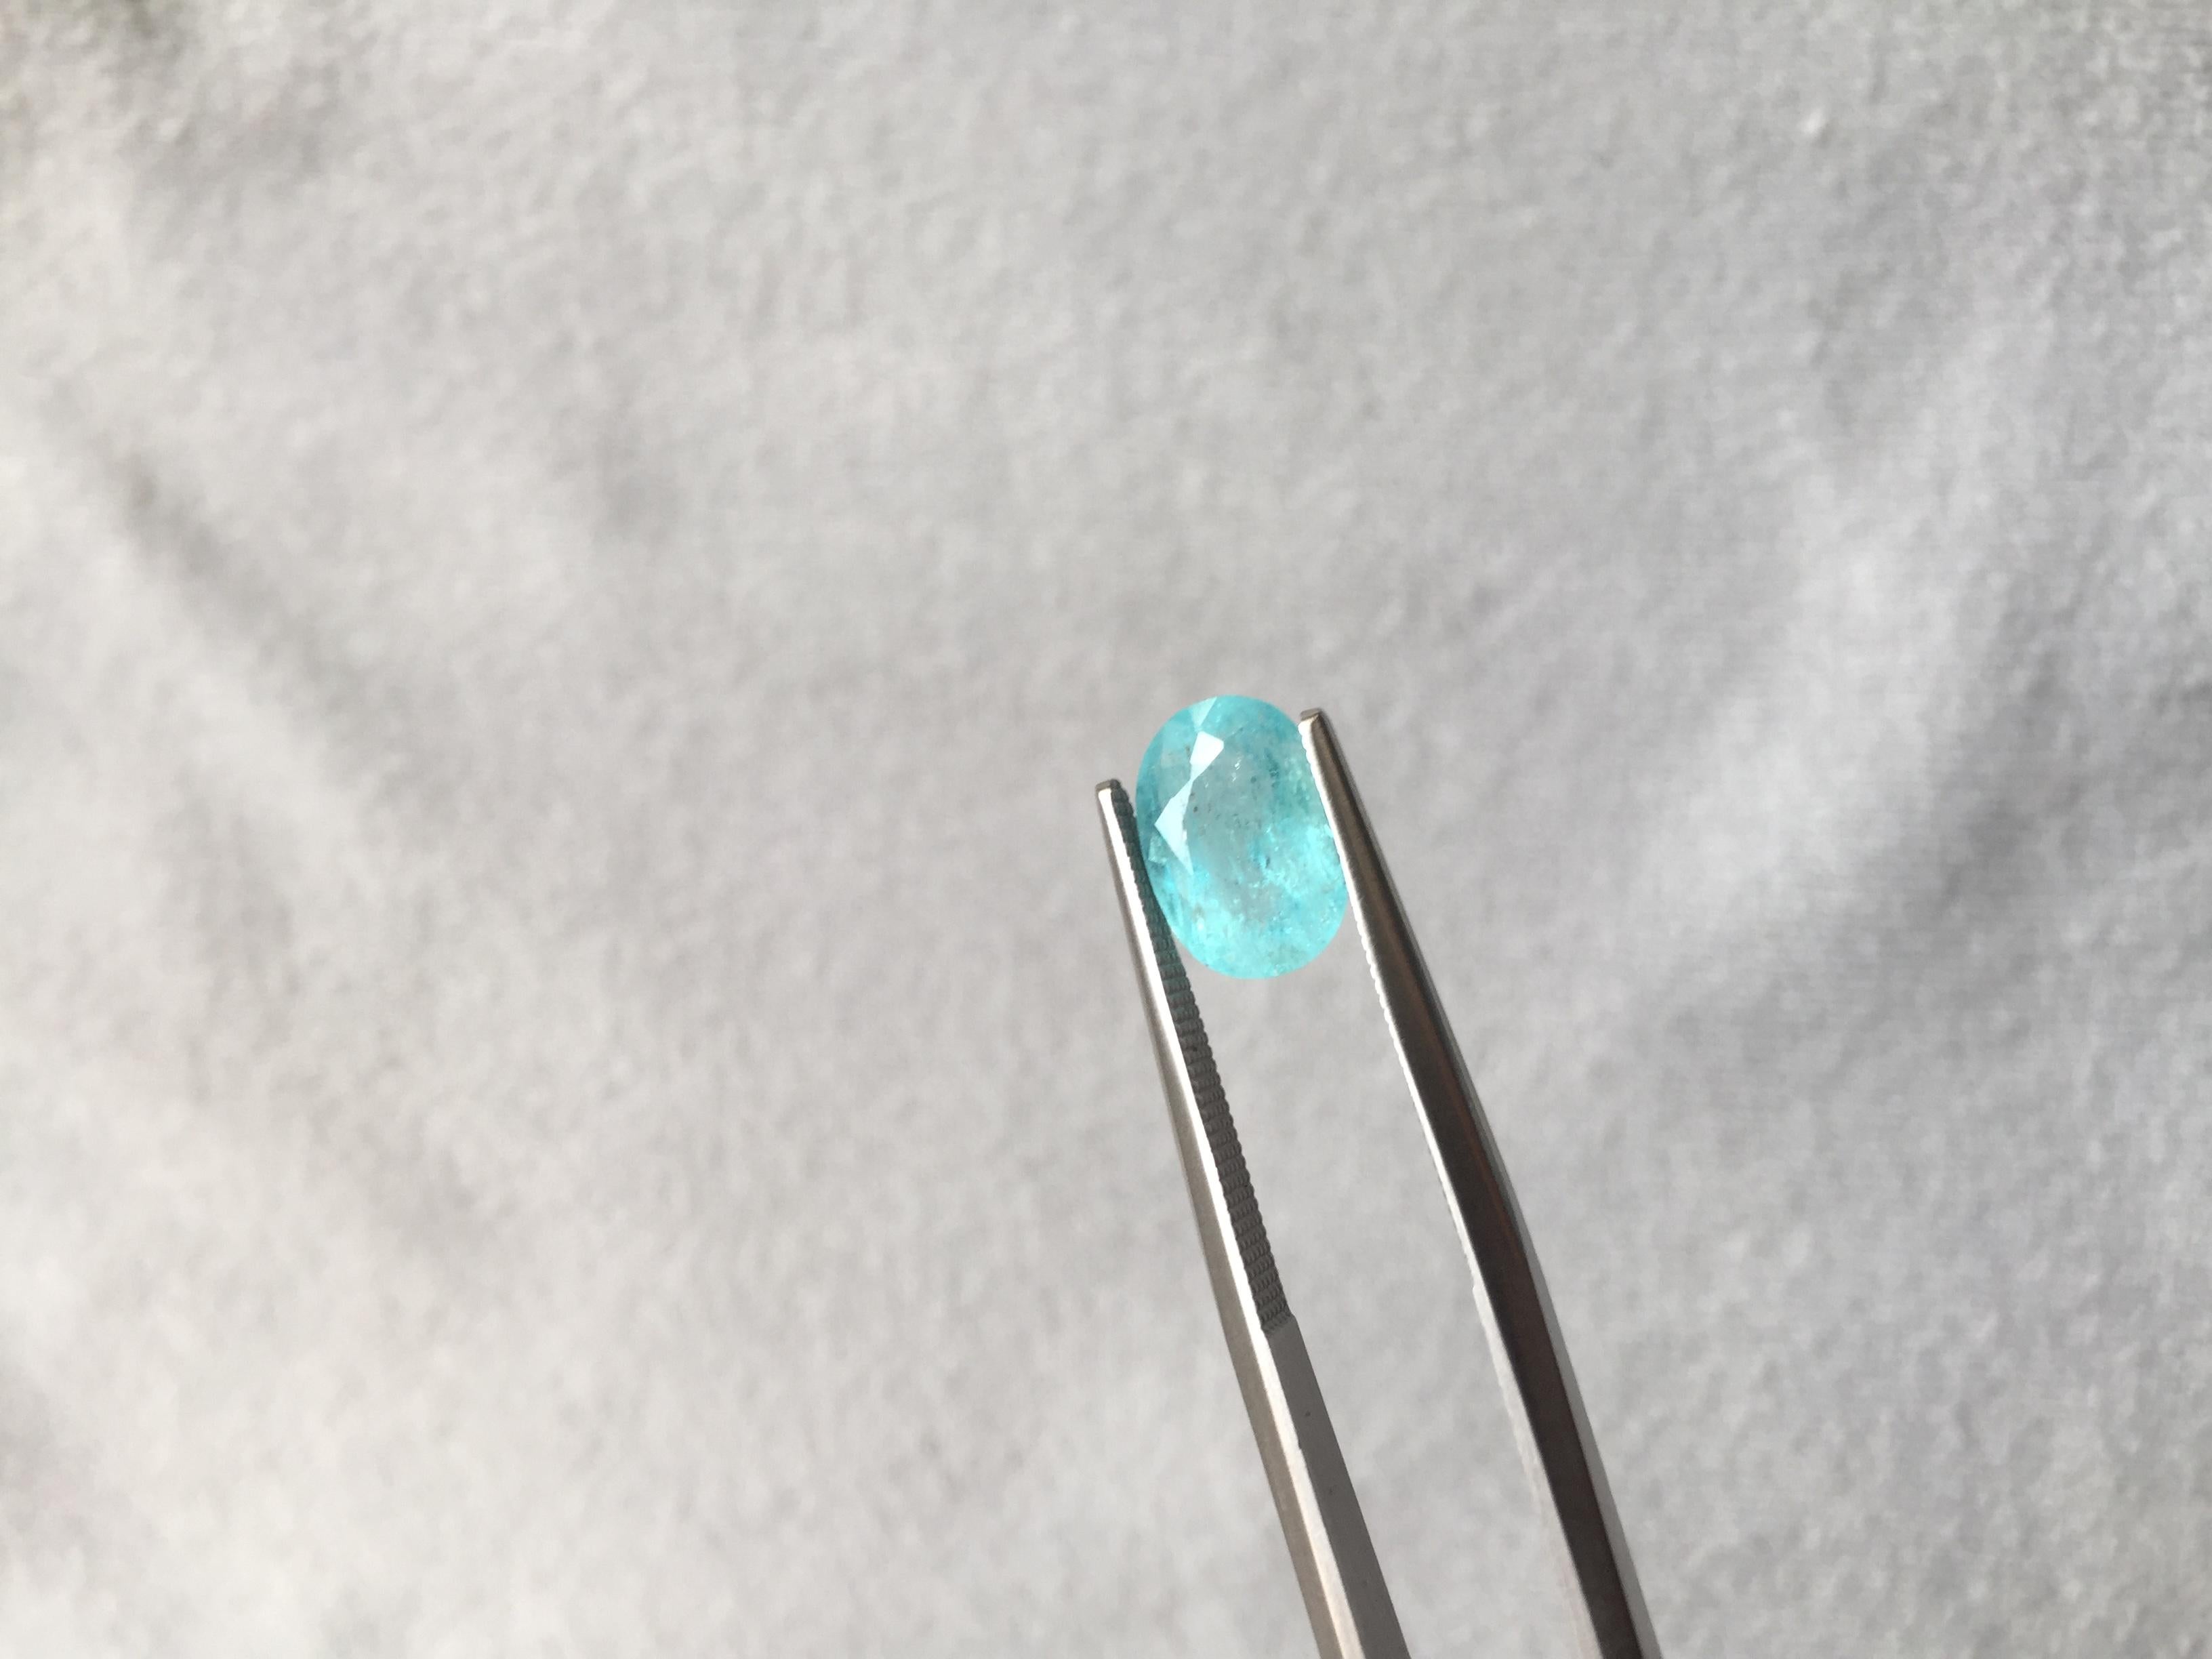 Exceptional 7.96 Carats Paraiba Tourmaline Oval Cut Stone for Fine Jewellery  